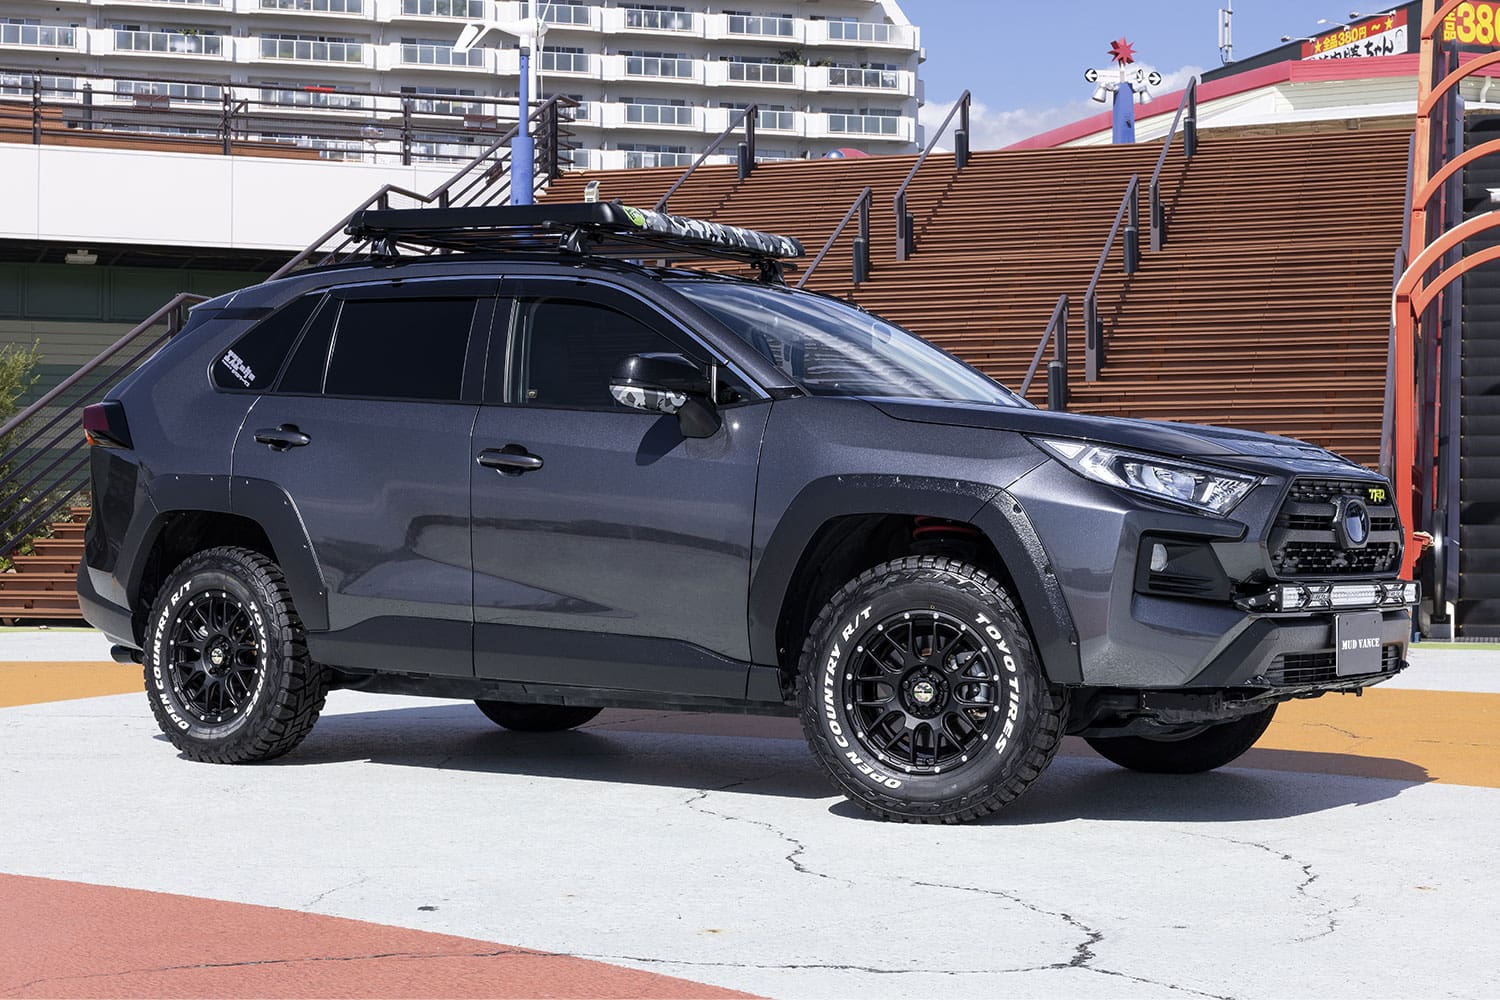 Gray SUV with roof rack and off-road tires.